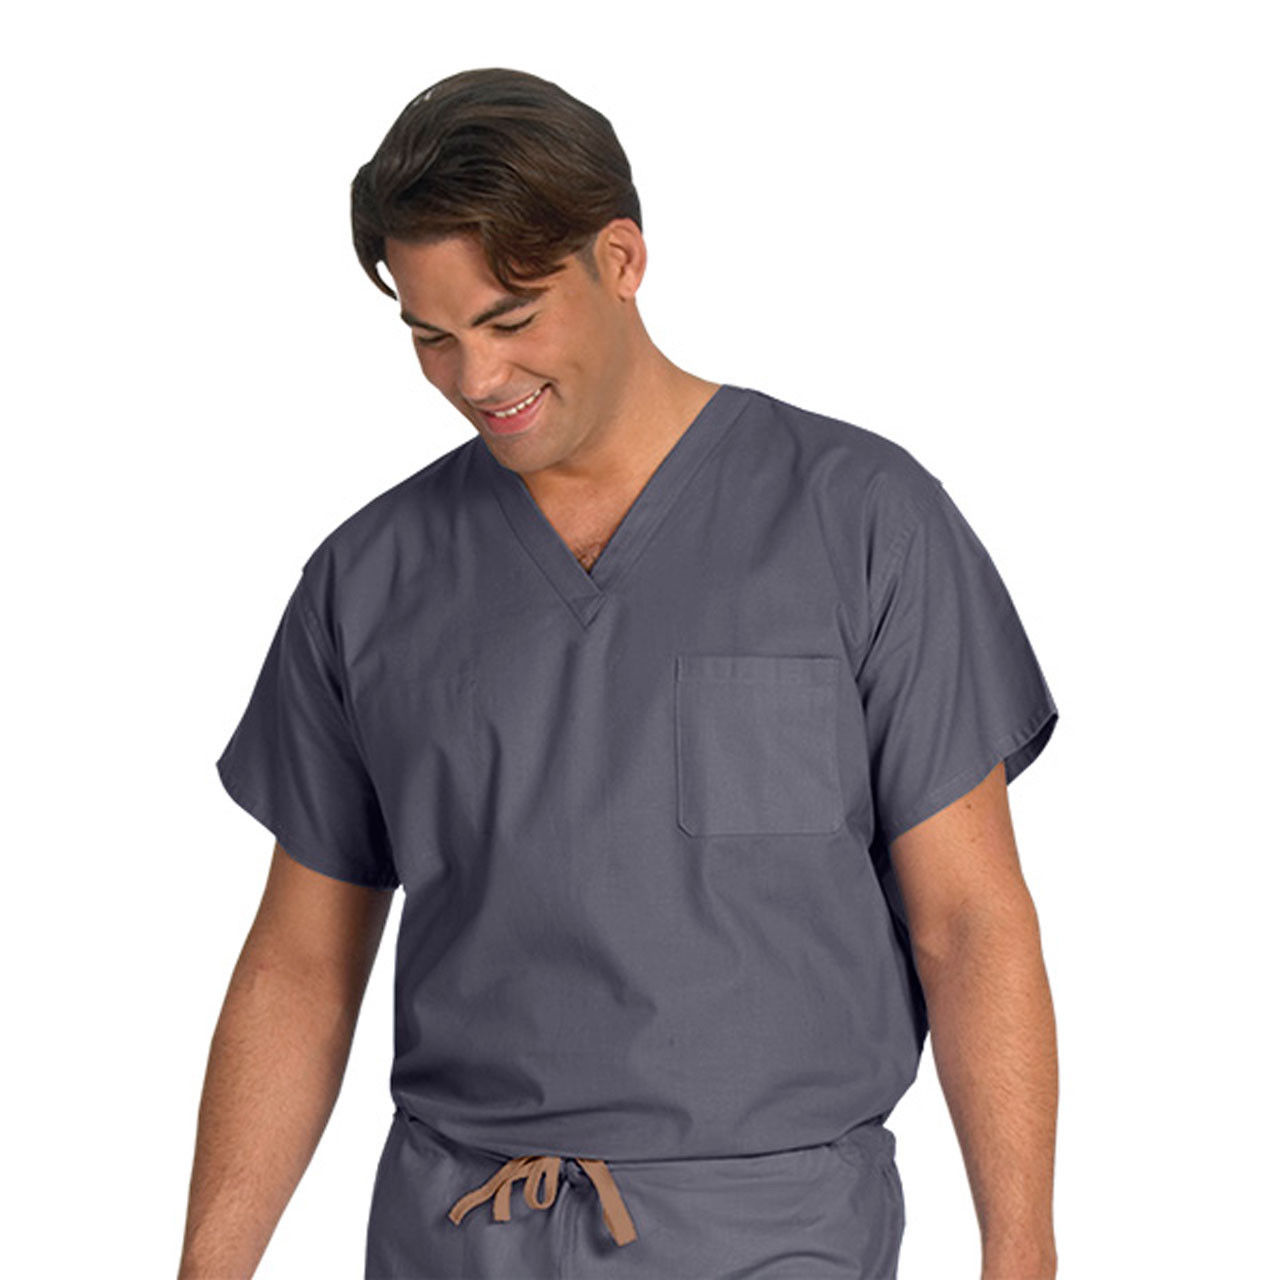 Is the charcoal grey scrubs set durable and long lasting?